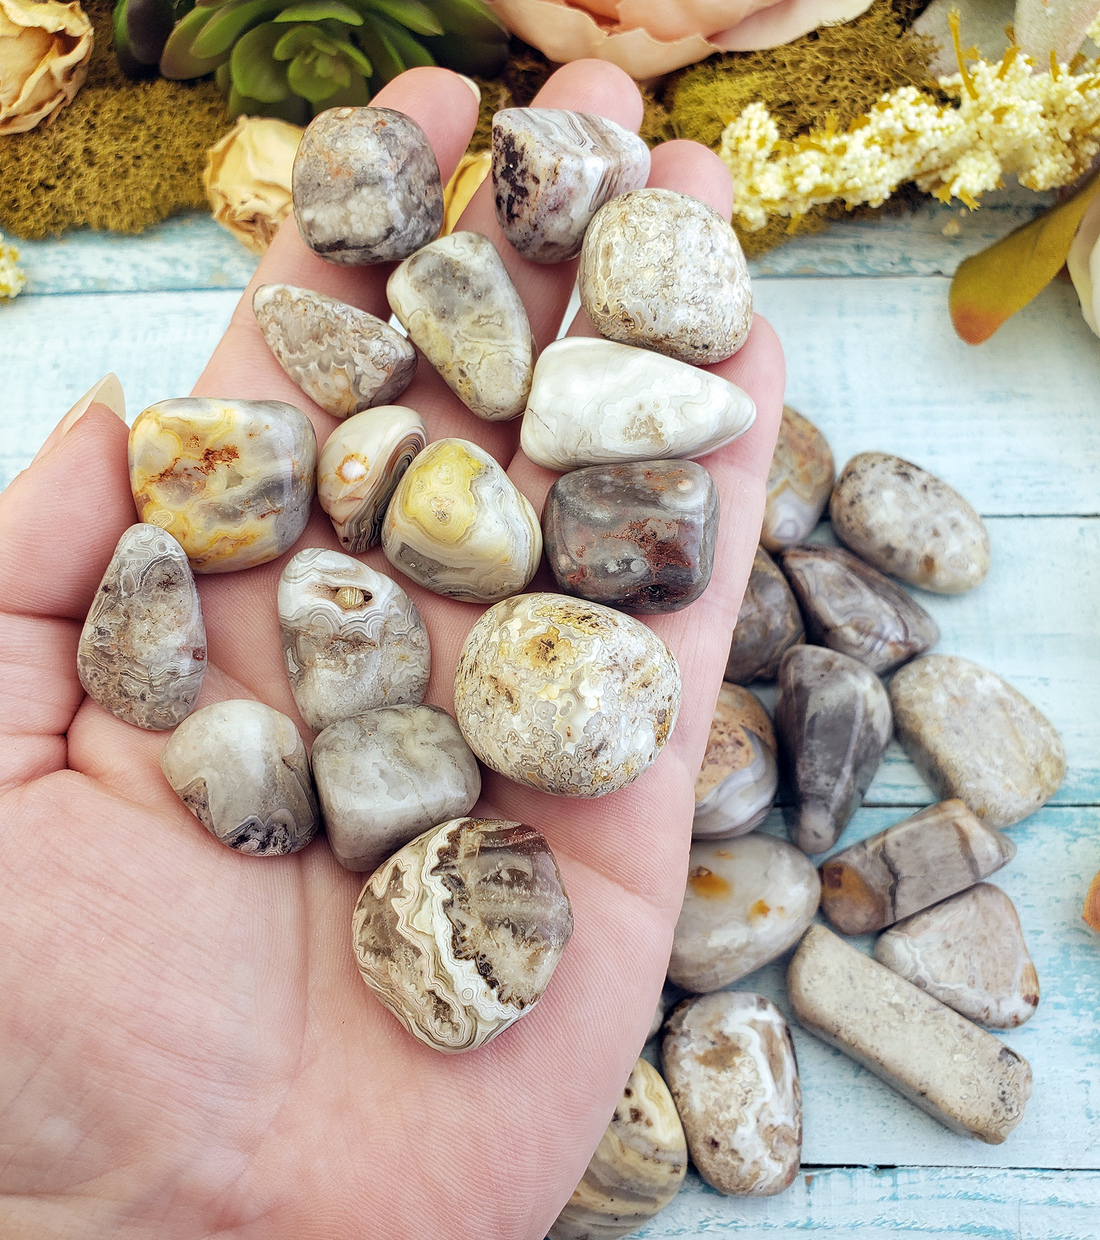 Grey Crazy Lace Agate Tumbled Stone - One Stone or Bulk Wholesale - Group in Hand